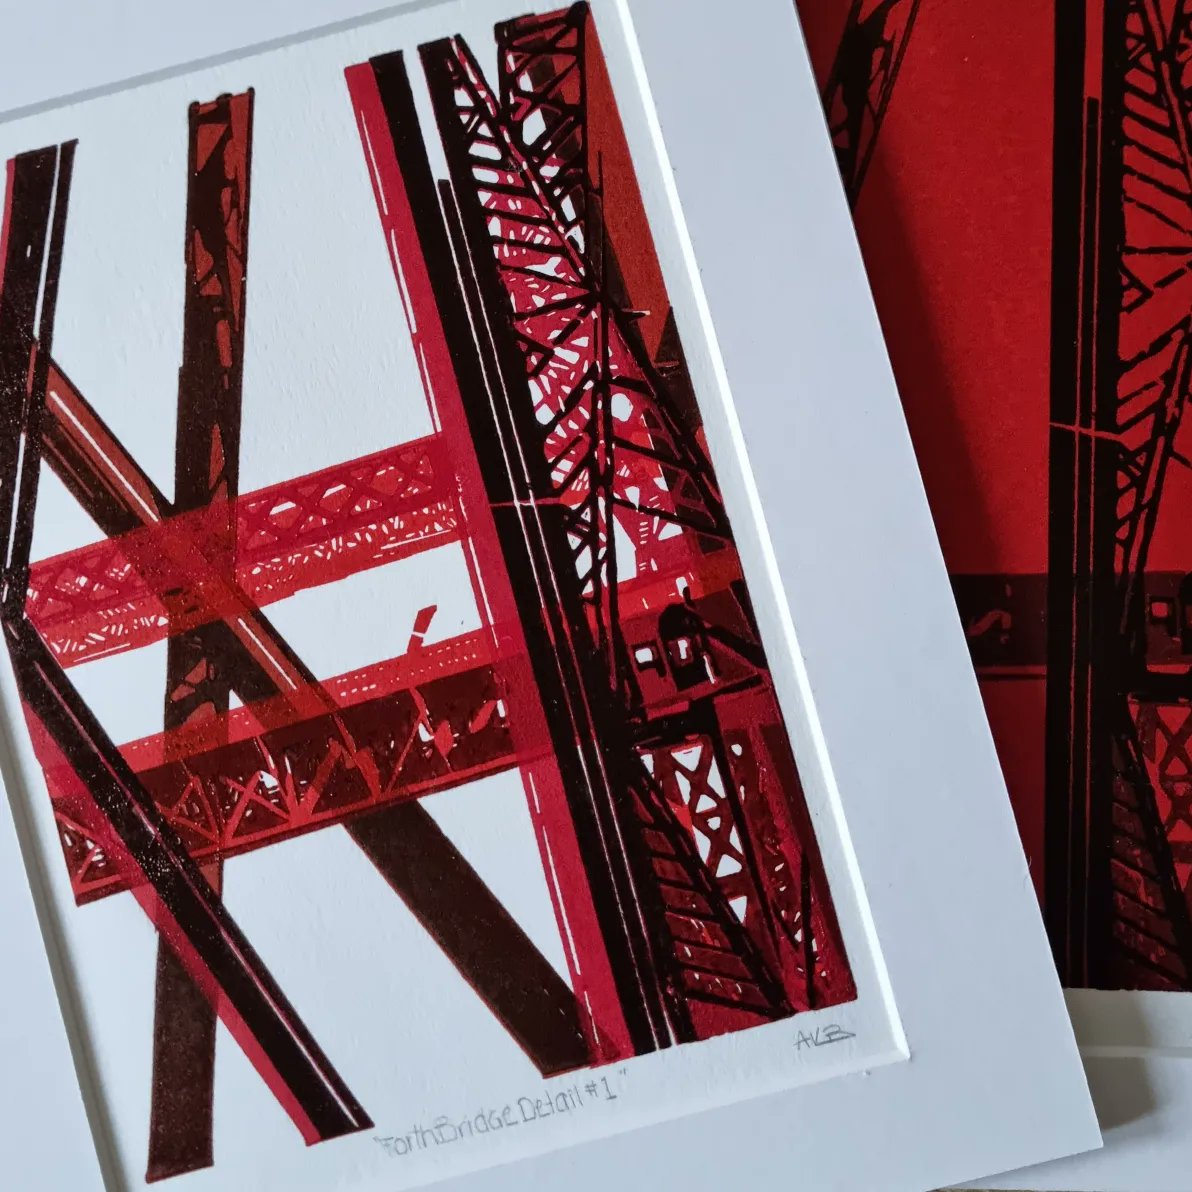 Some new Forth Bridge Original Limited Edition linoprints in shop - very small run on each - love the detail on these ❤️
annabilykartist.etsy.com 
#forthbridge #forthbridges #shopindie #ukgiftam #ukgifthour #MHHSBD #Railways #southqueensferry #etsy #prints #printmaking